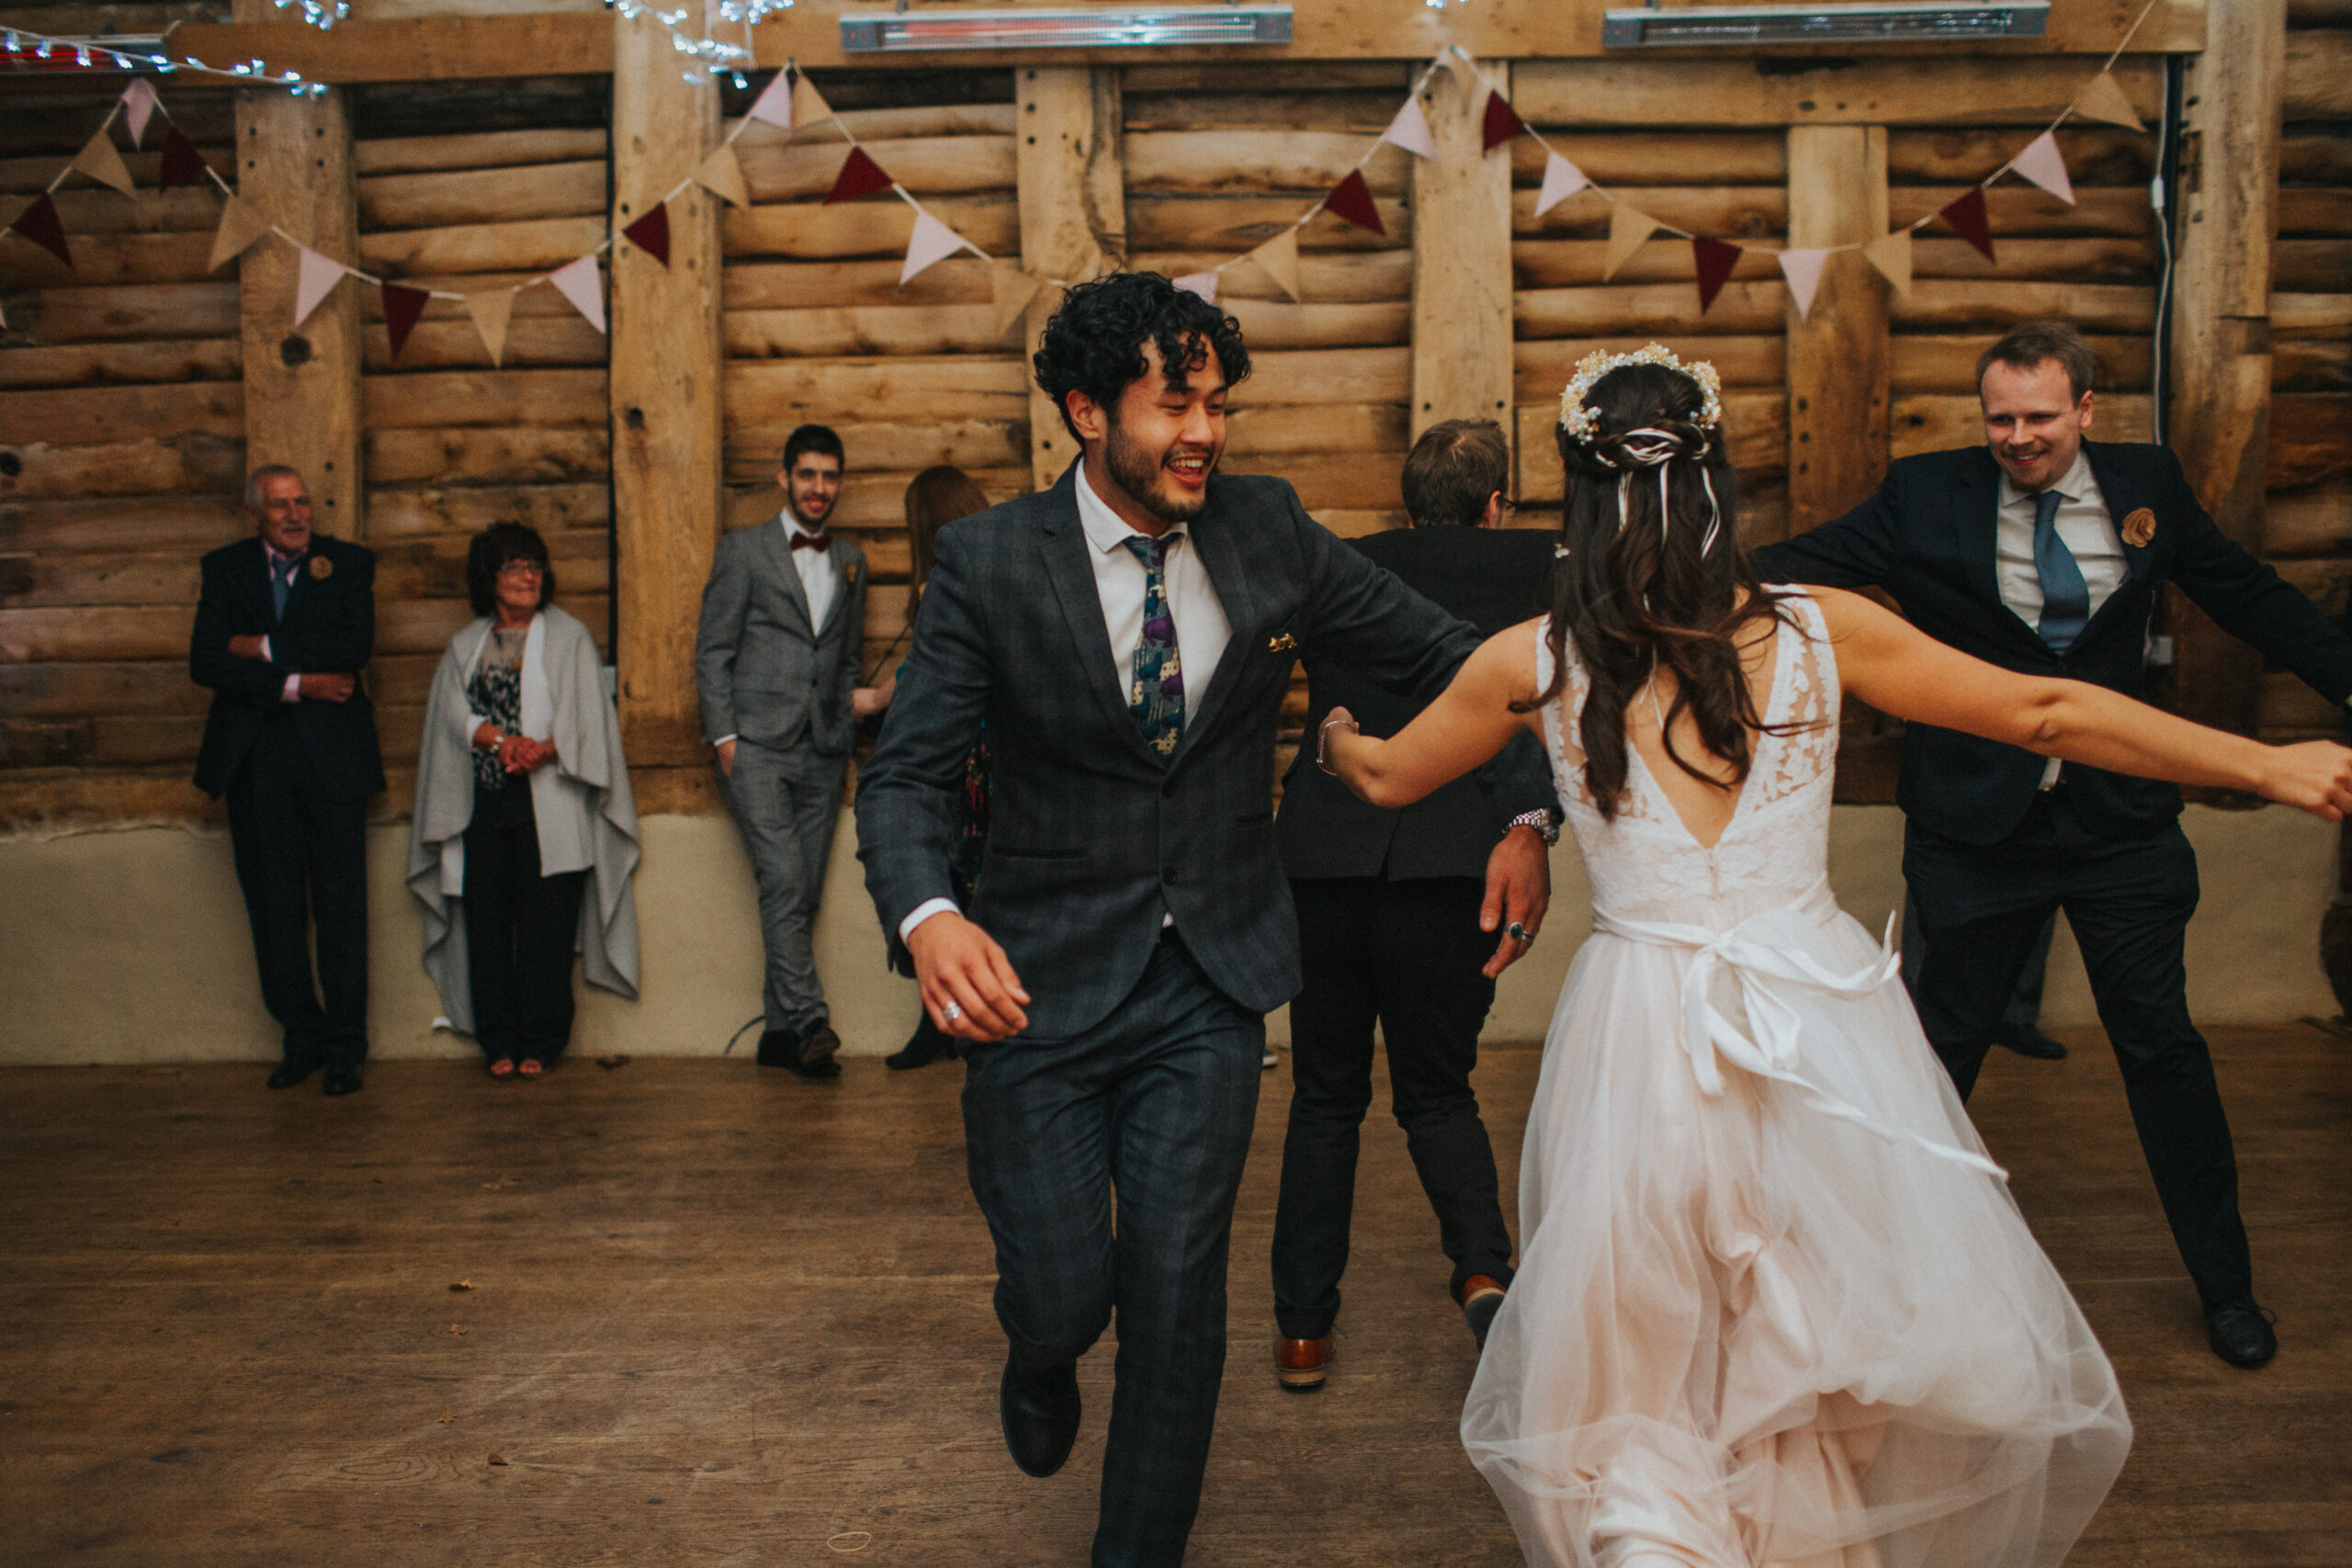 Autumnal love story told through the lens at Shropshire venue